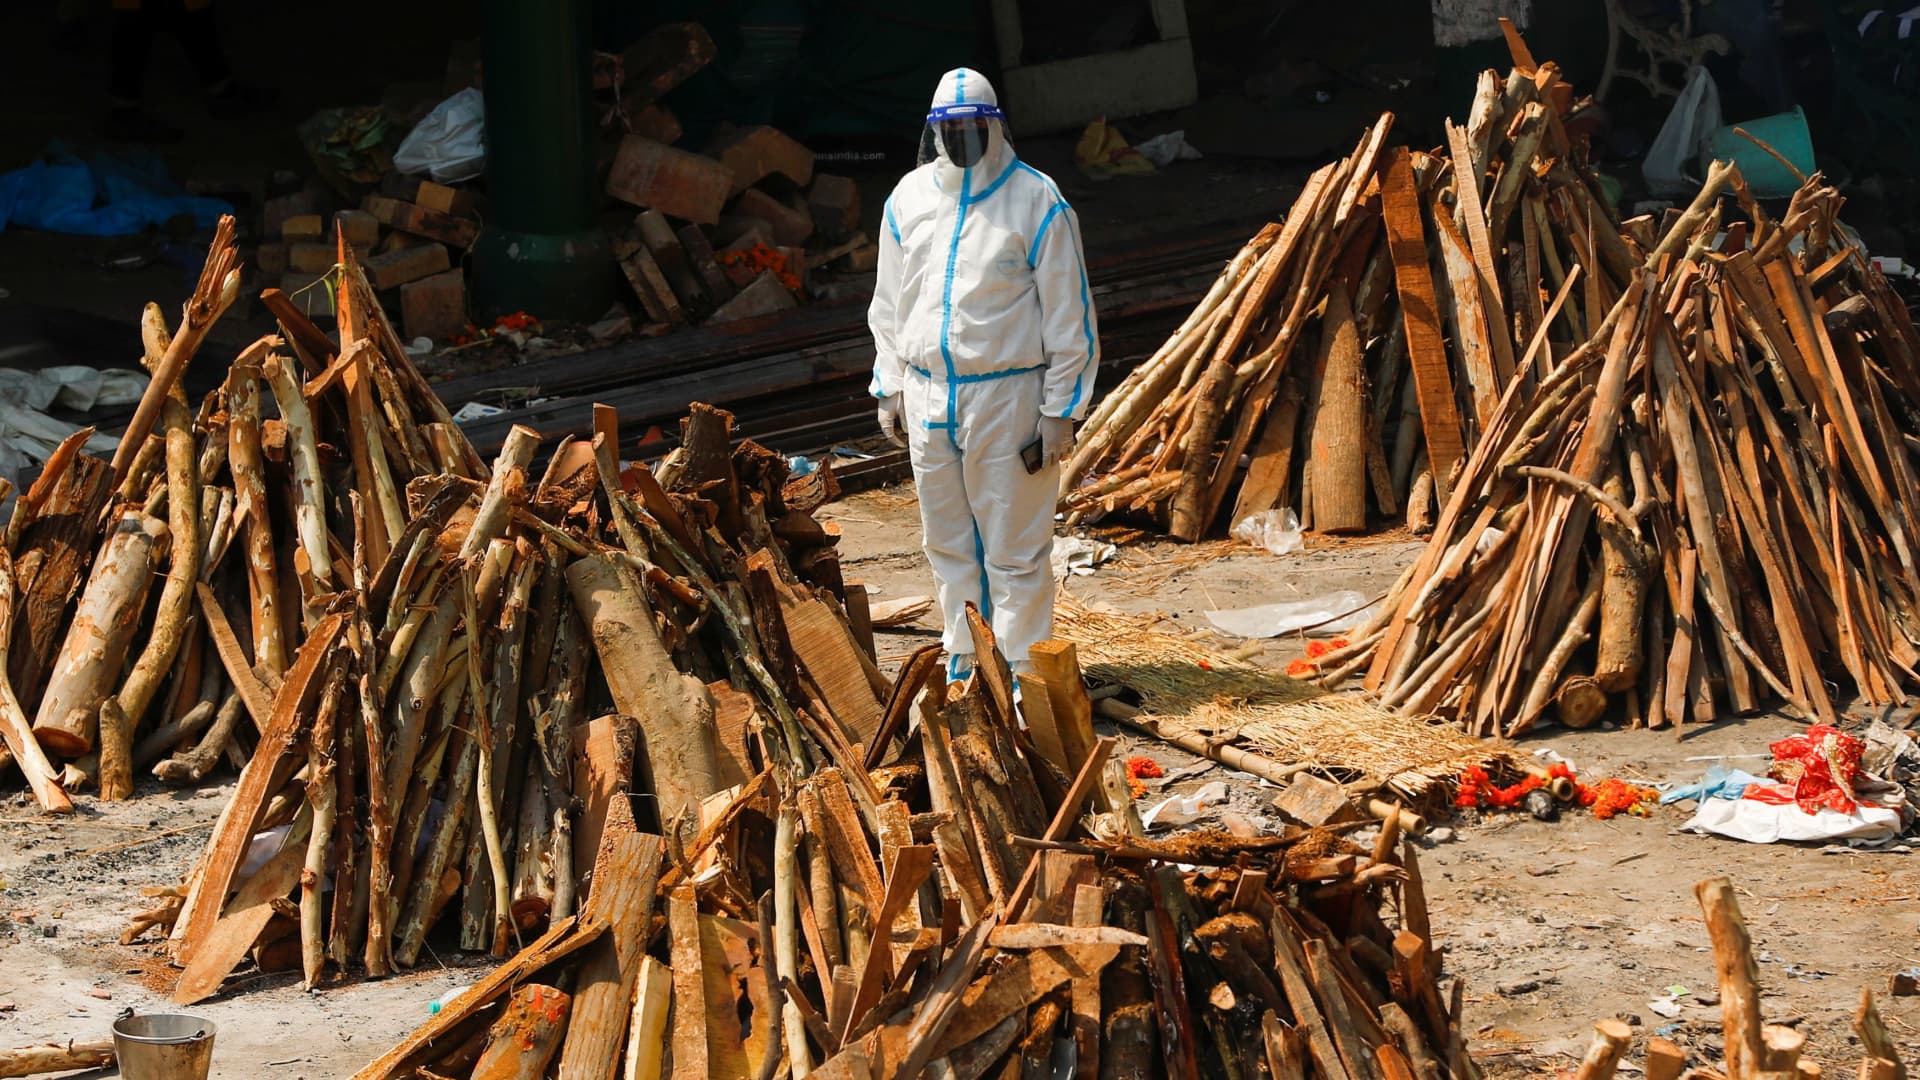 A man wearing personal protective equipment (PPE) stands next to funeral pyres of those who died from the coronavirus disease (COVID-19), during a mass cremation, at a crematorium in New Delhi, India April 26, 2021.